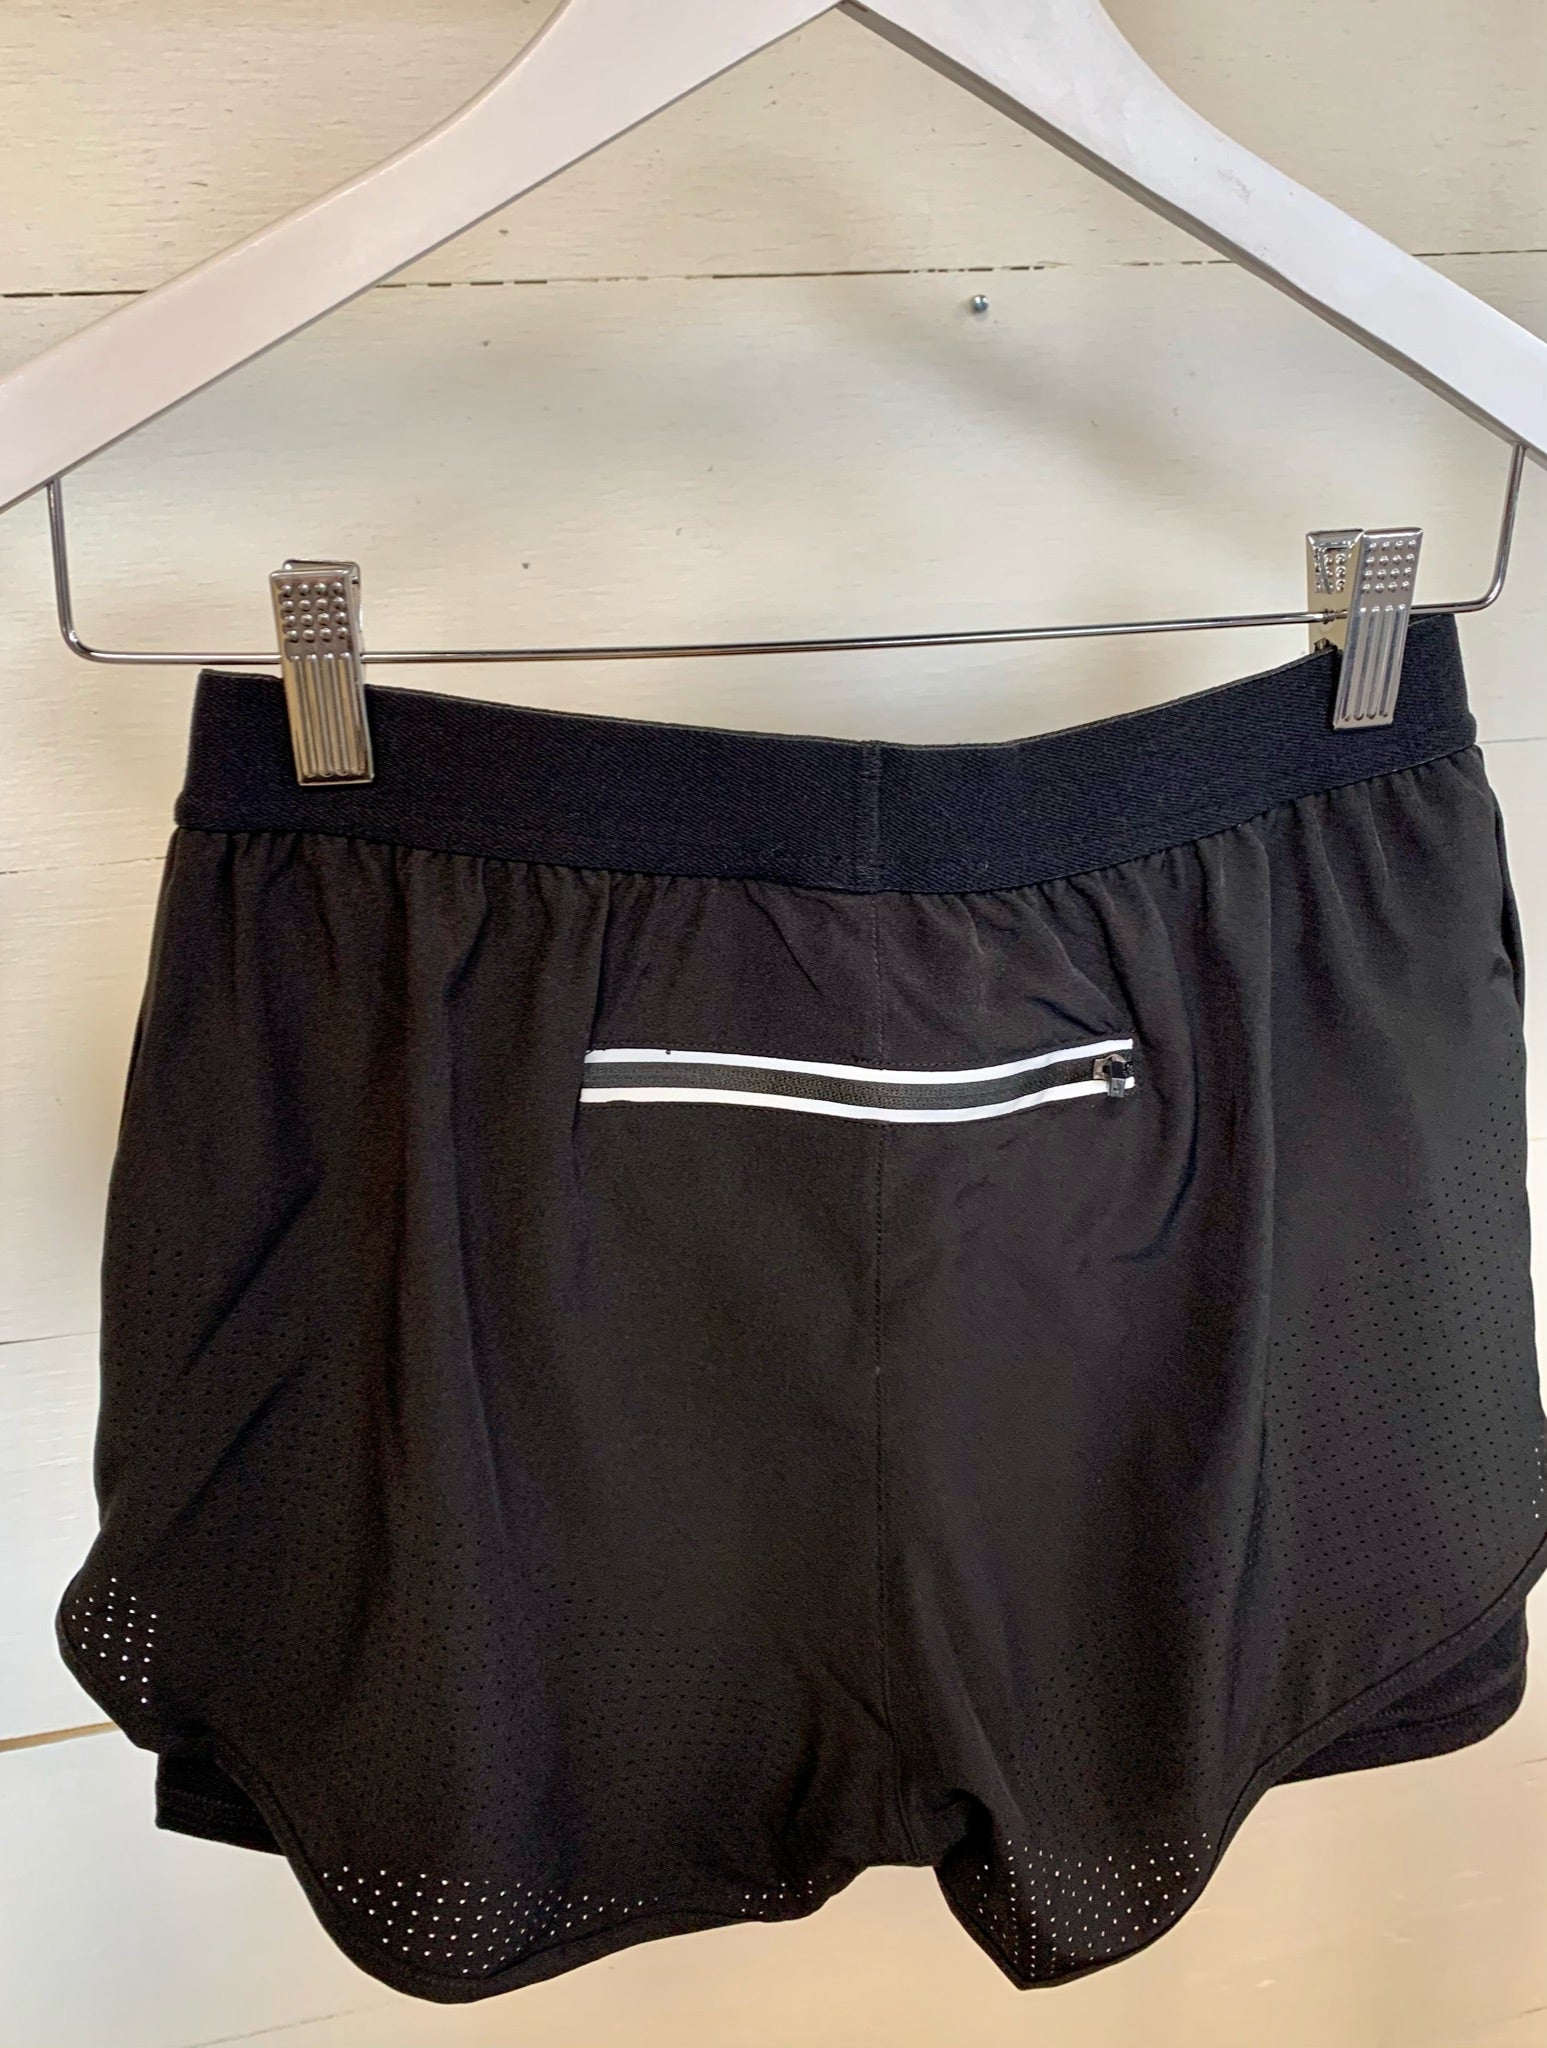 Lined Perforated Active Shorts